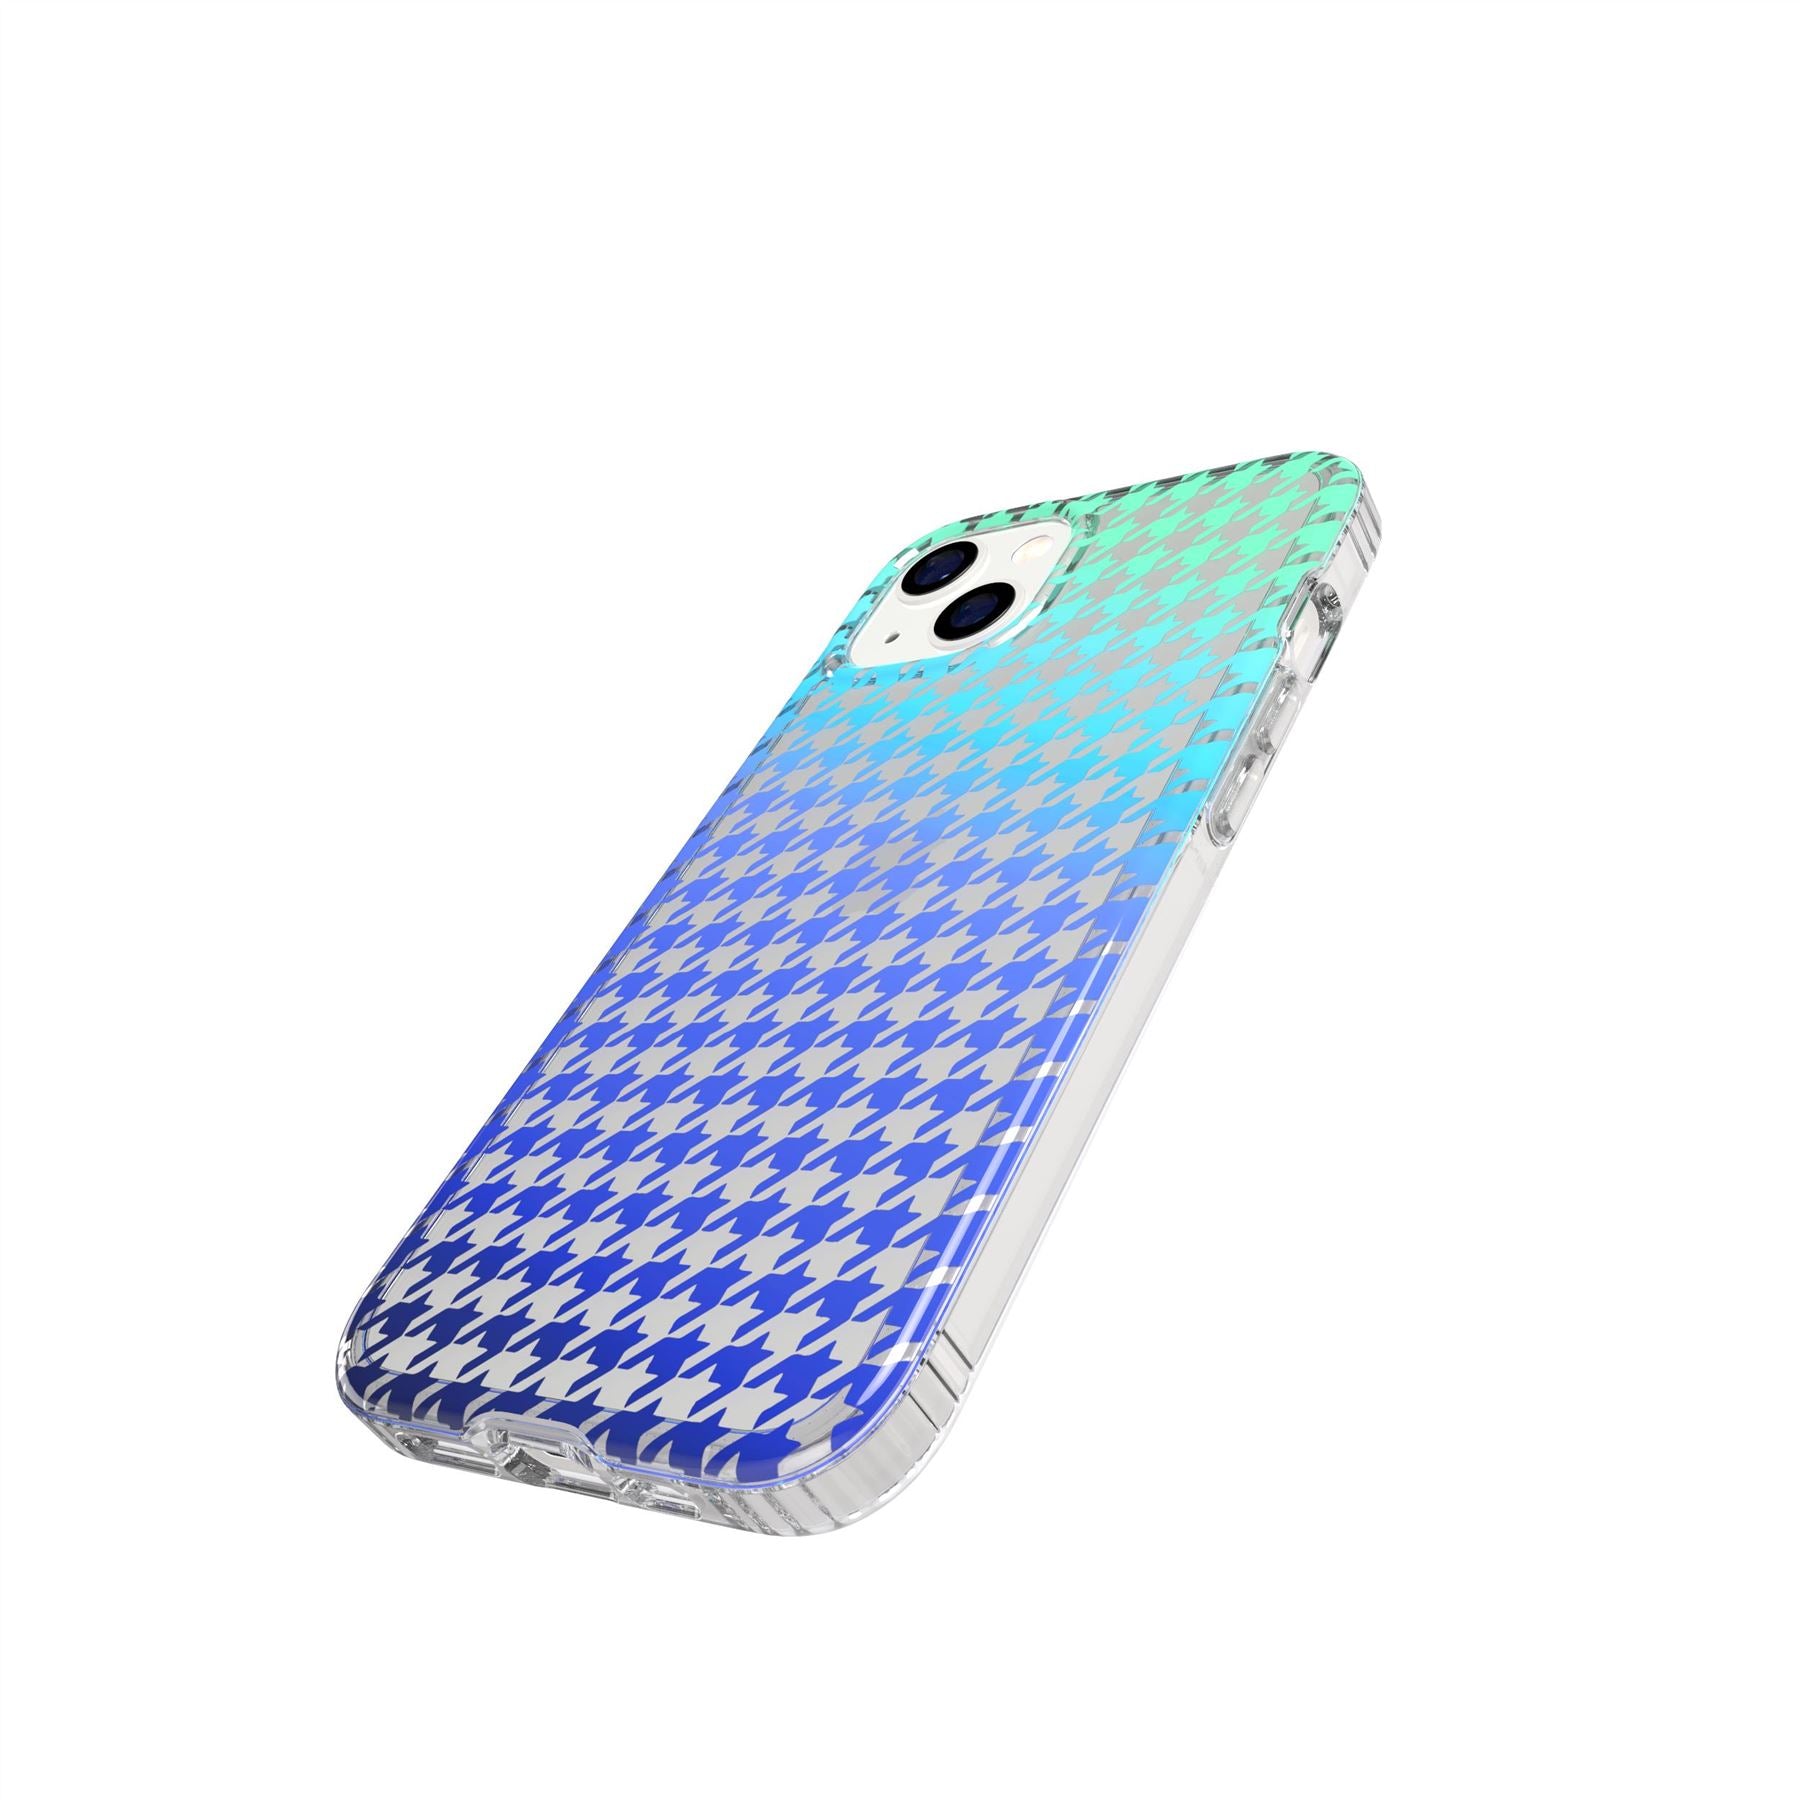 Evo Art - Apple iPhone 13 Case - Ombre Houndstooth